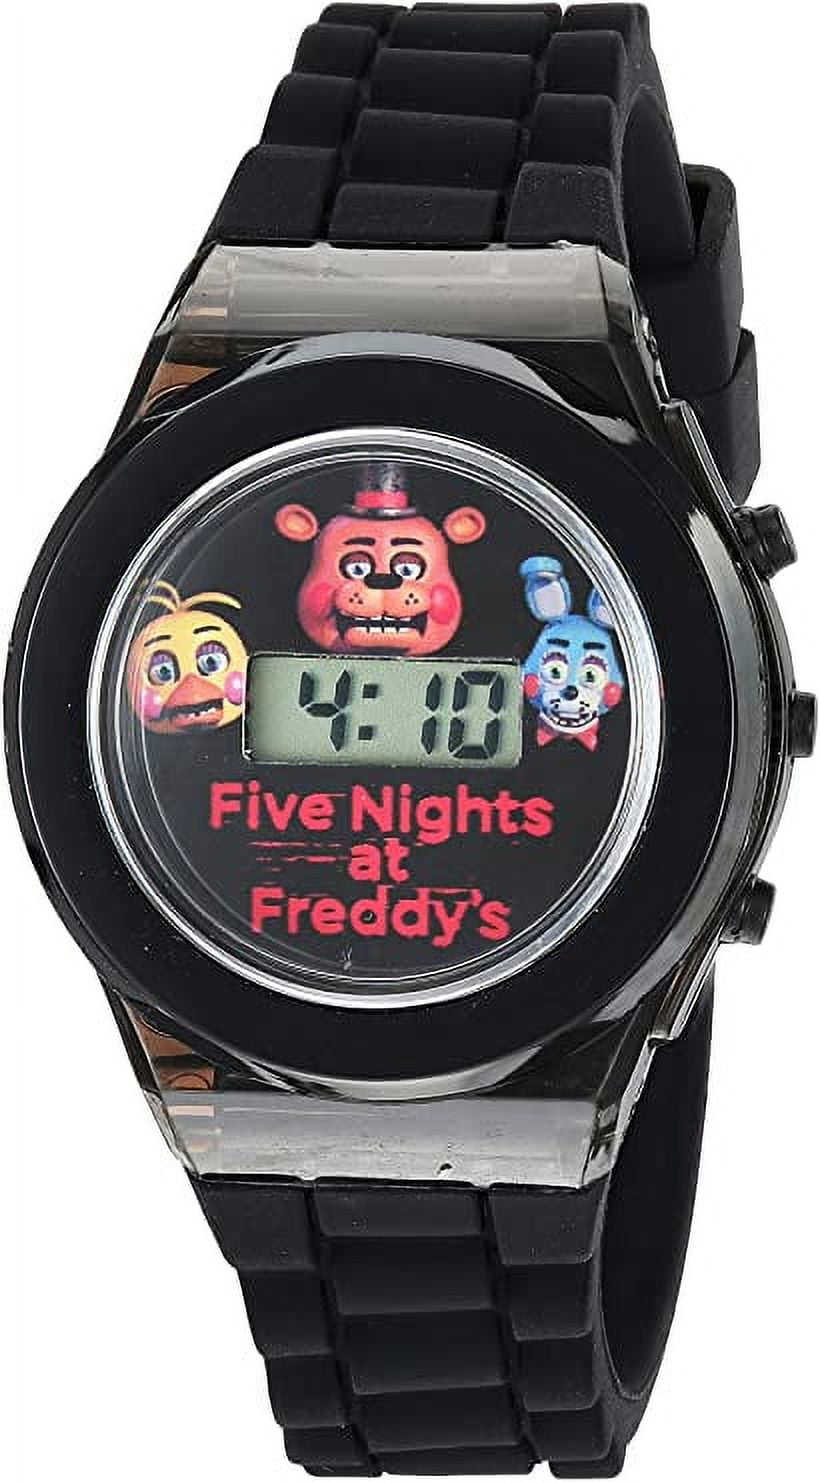 Five Nights at Freddy's, Watch Page